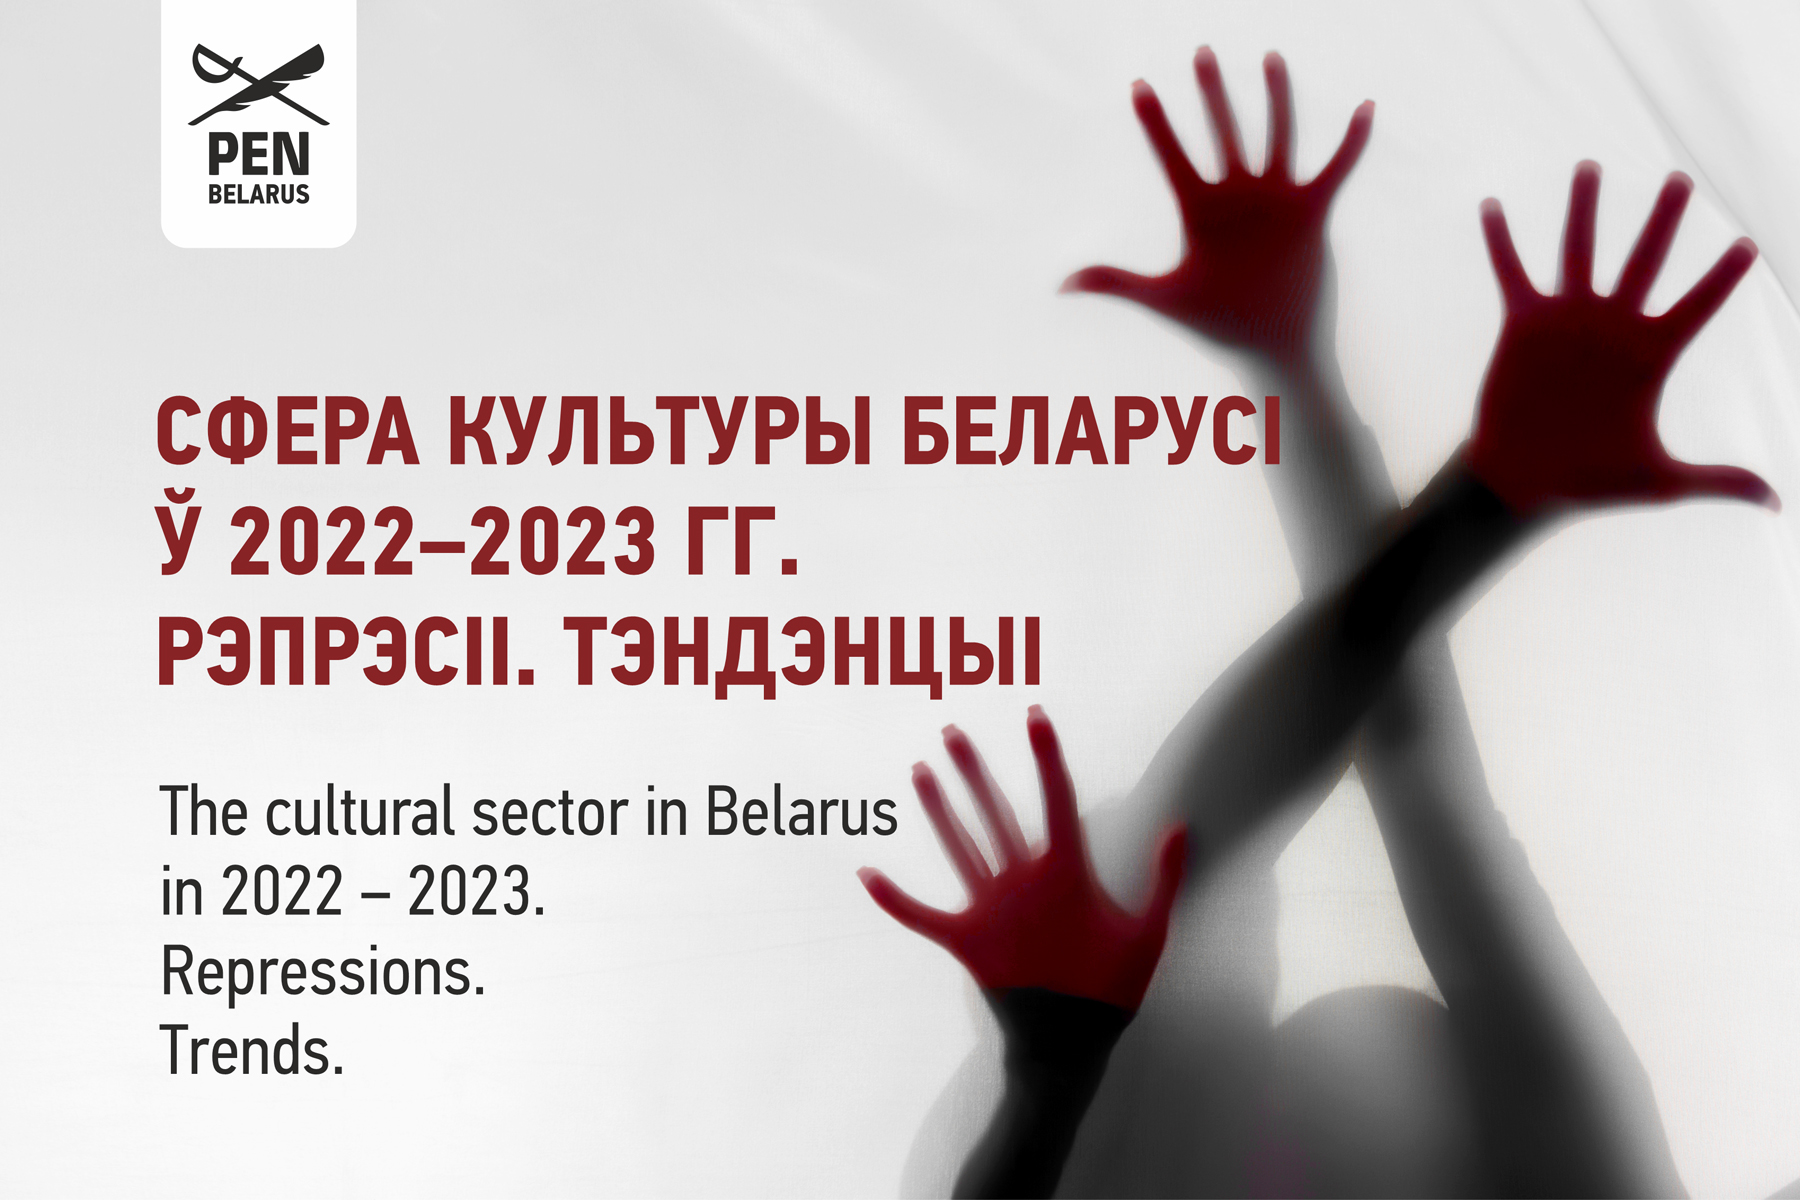 The cultural sector in Belarus in 2022 – 2023. Repressions. Trends